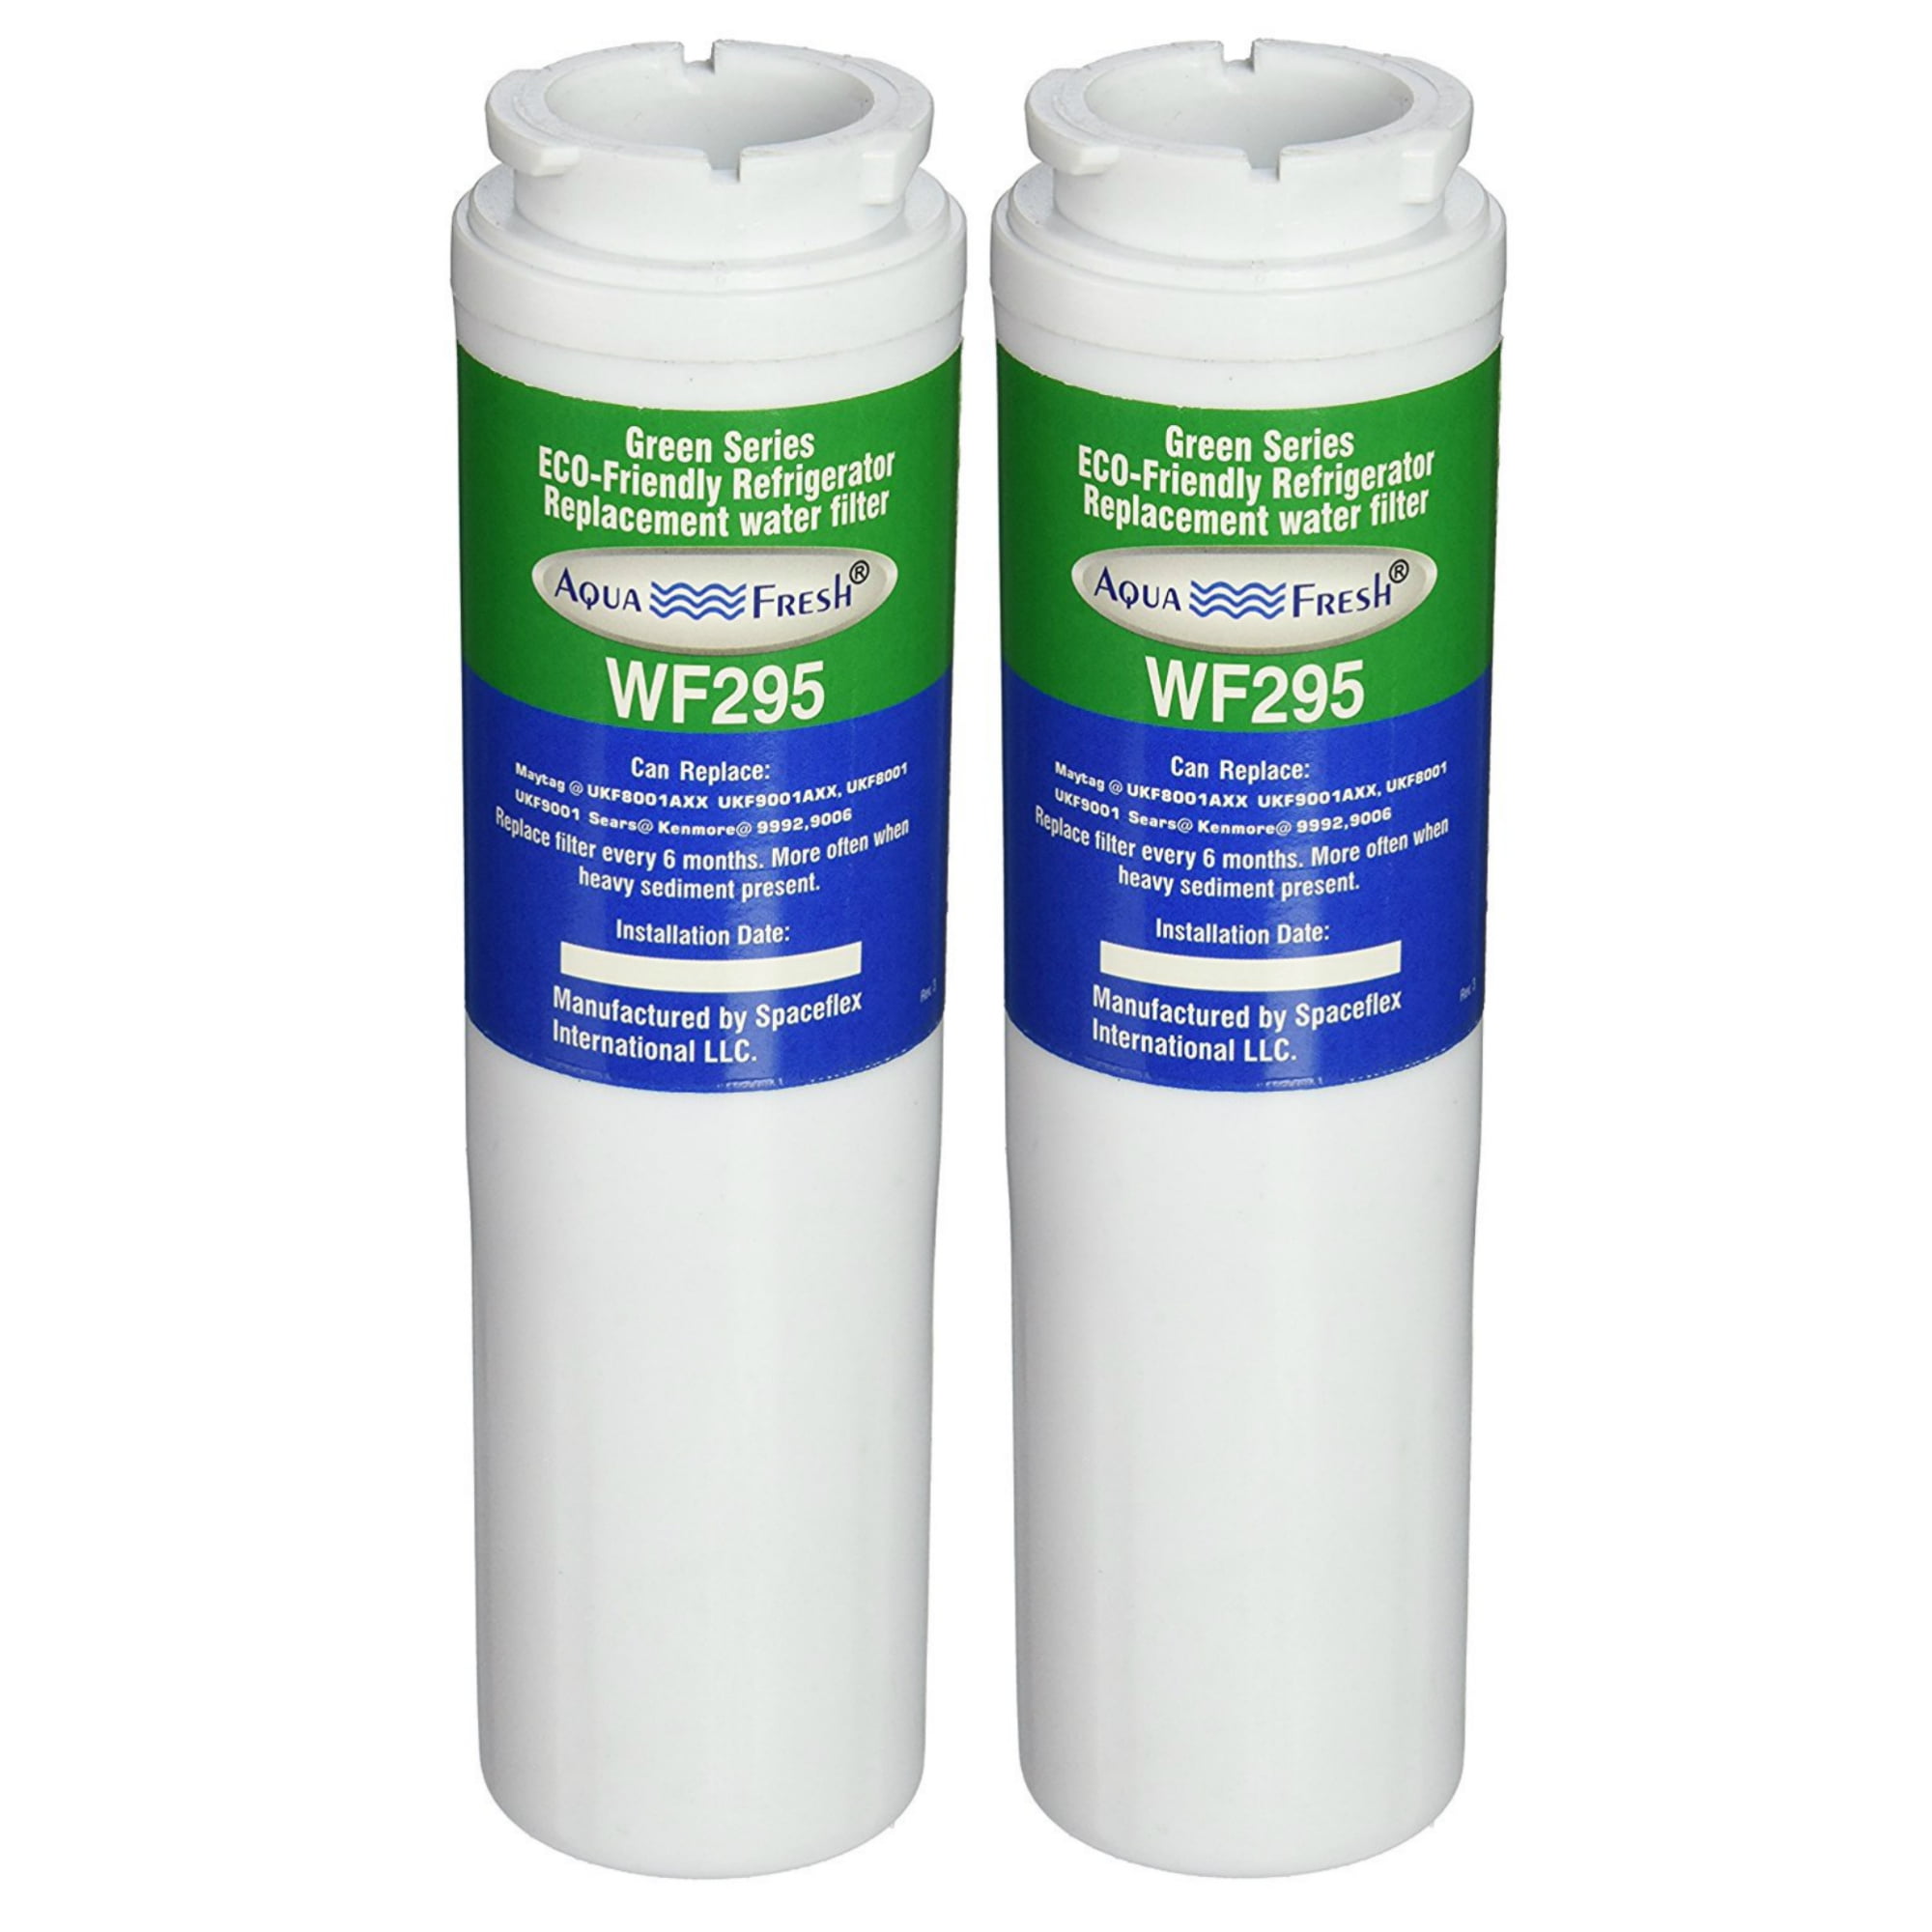 Puriclean II EDR4RXD1 Whirlpool 4396395 EcoAqua EFF-6007A Replacement Filter Everydrop Filter 4 Viking RWFFR Refrigerator Water Filter 2 Pack Compatible with Maytag UKF8001 Kenmore 46-9006 